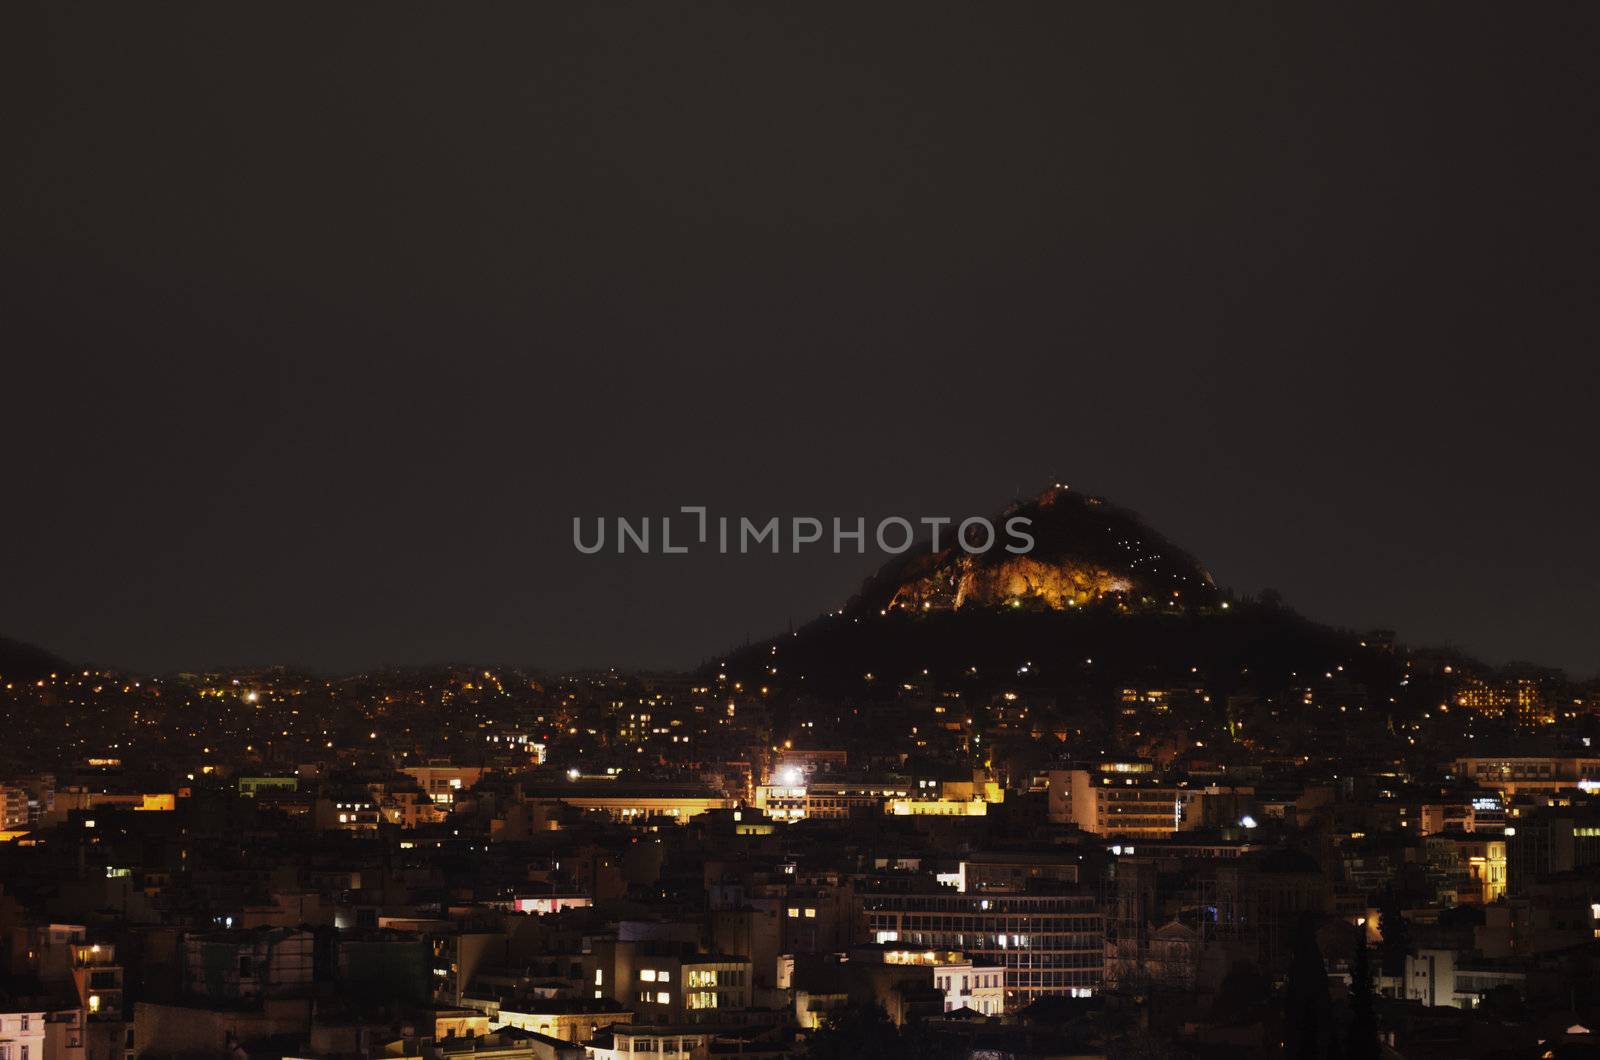 Nighttime view over Athens. The Lykavittos can be seen as a prominent feature in the picture.